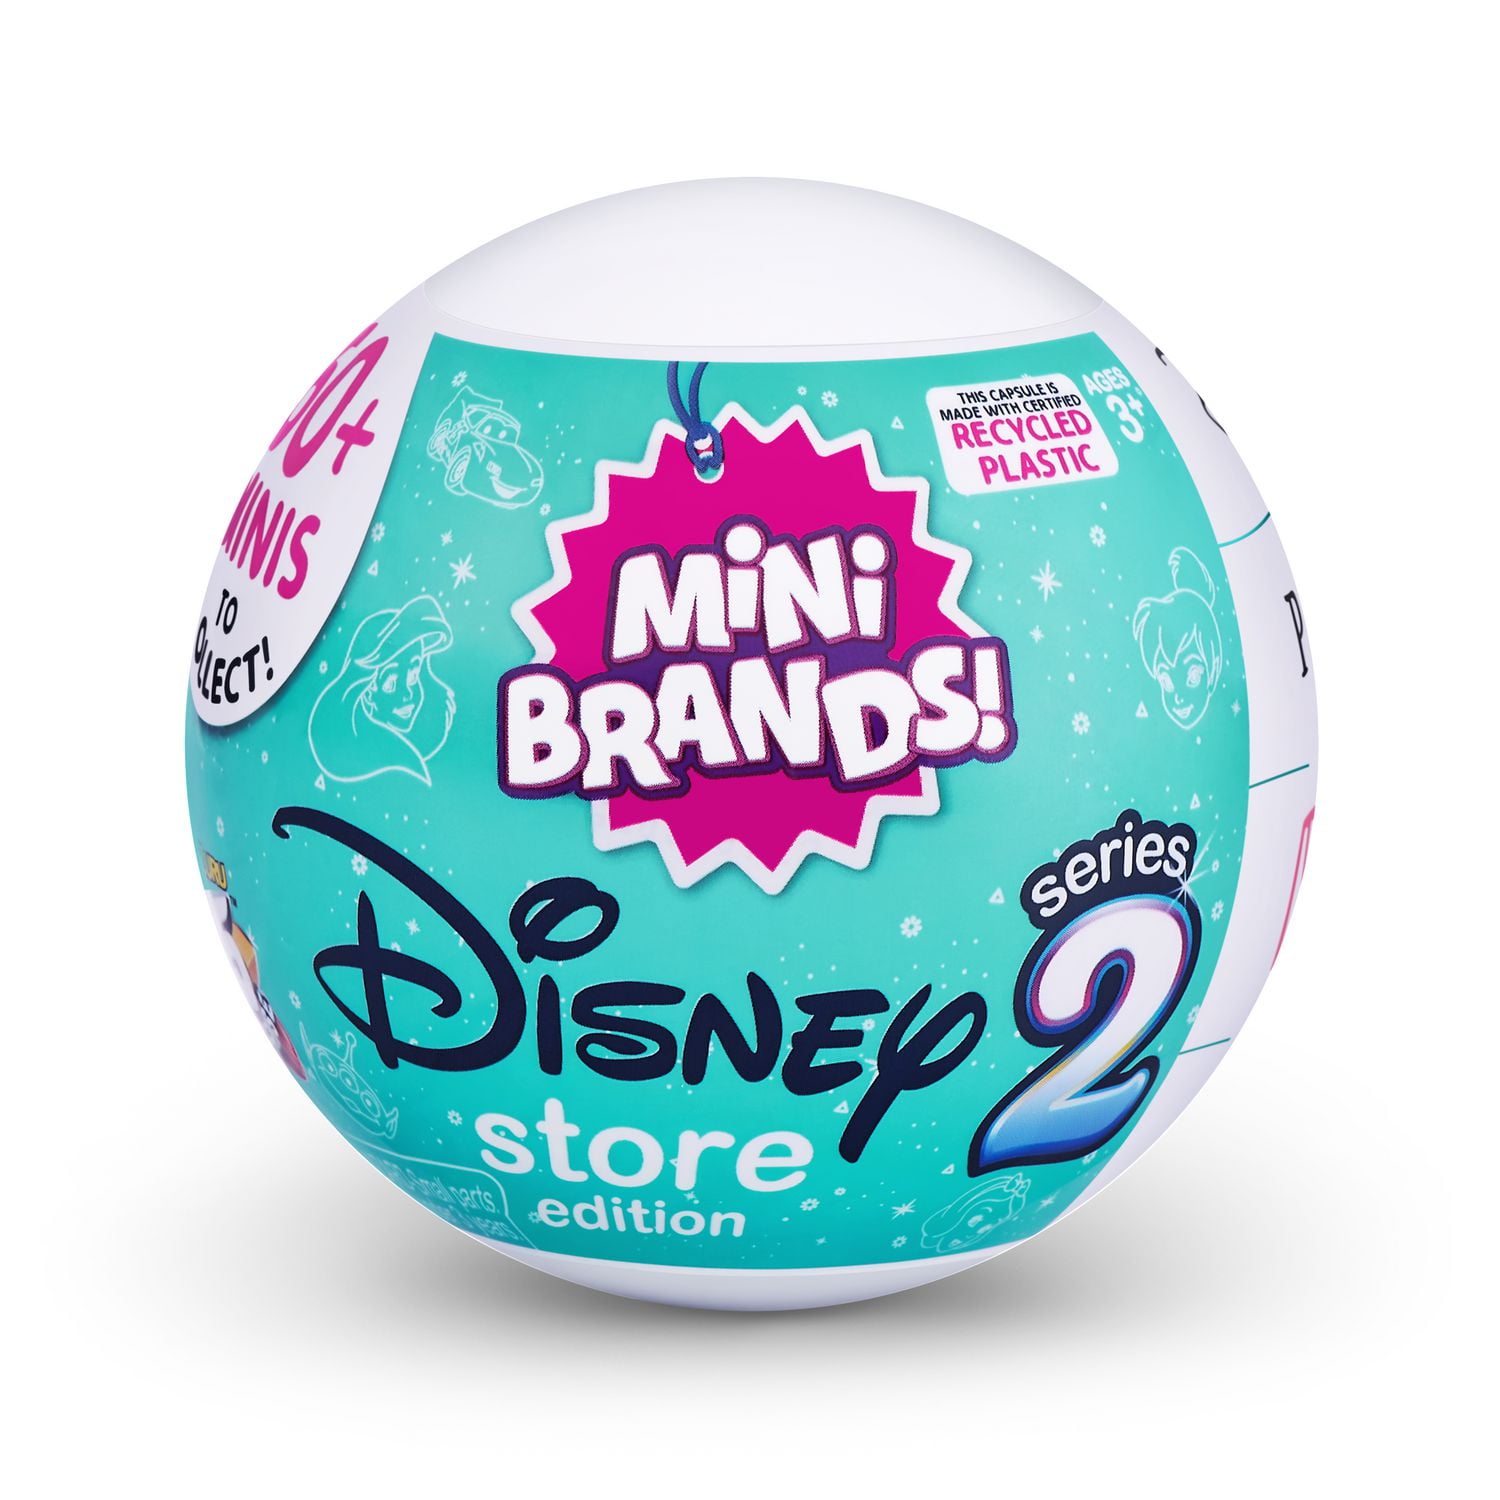 5 Surprise Disney Store Mini Brands Toy Store Playset with 5 Mystery Minis  Including 2 Exclusive Minis by ZURU